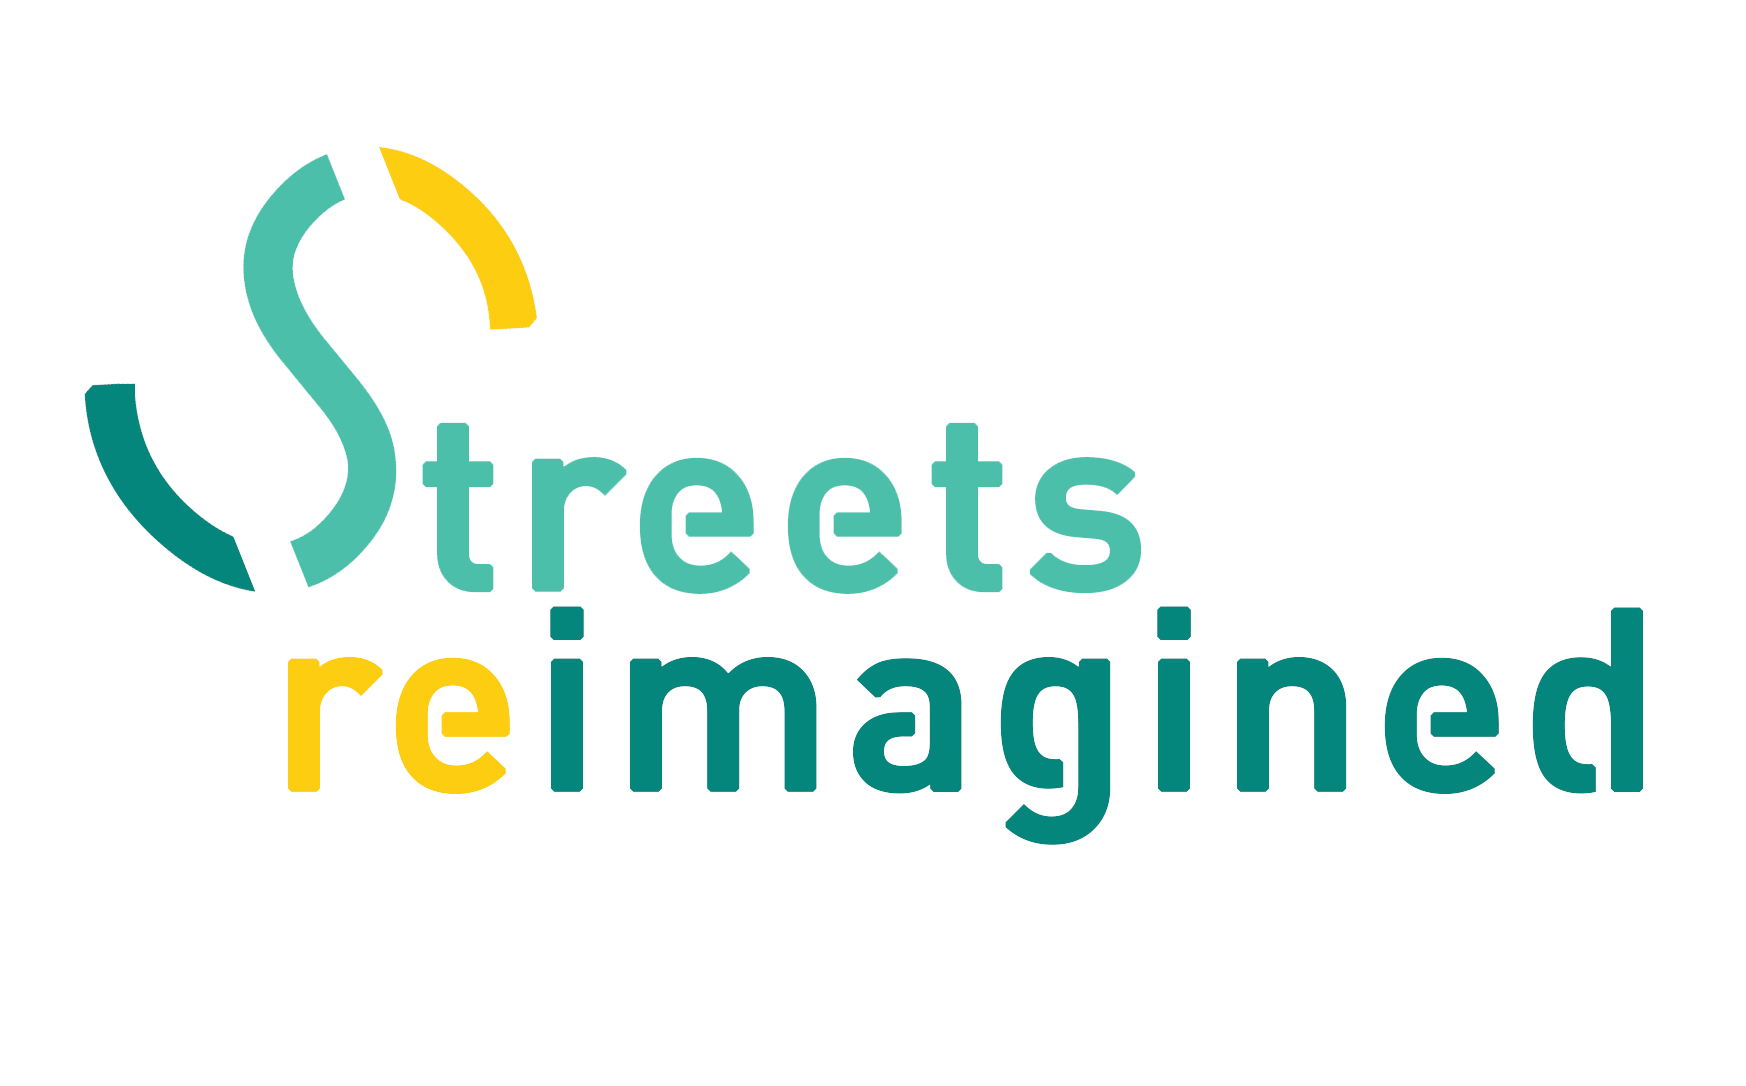 Streets Reimagined